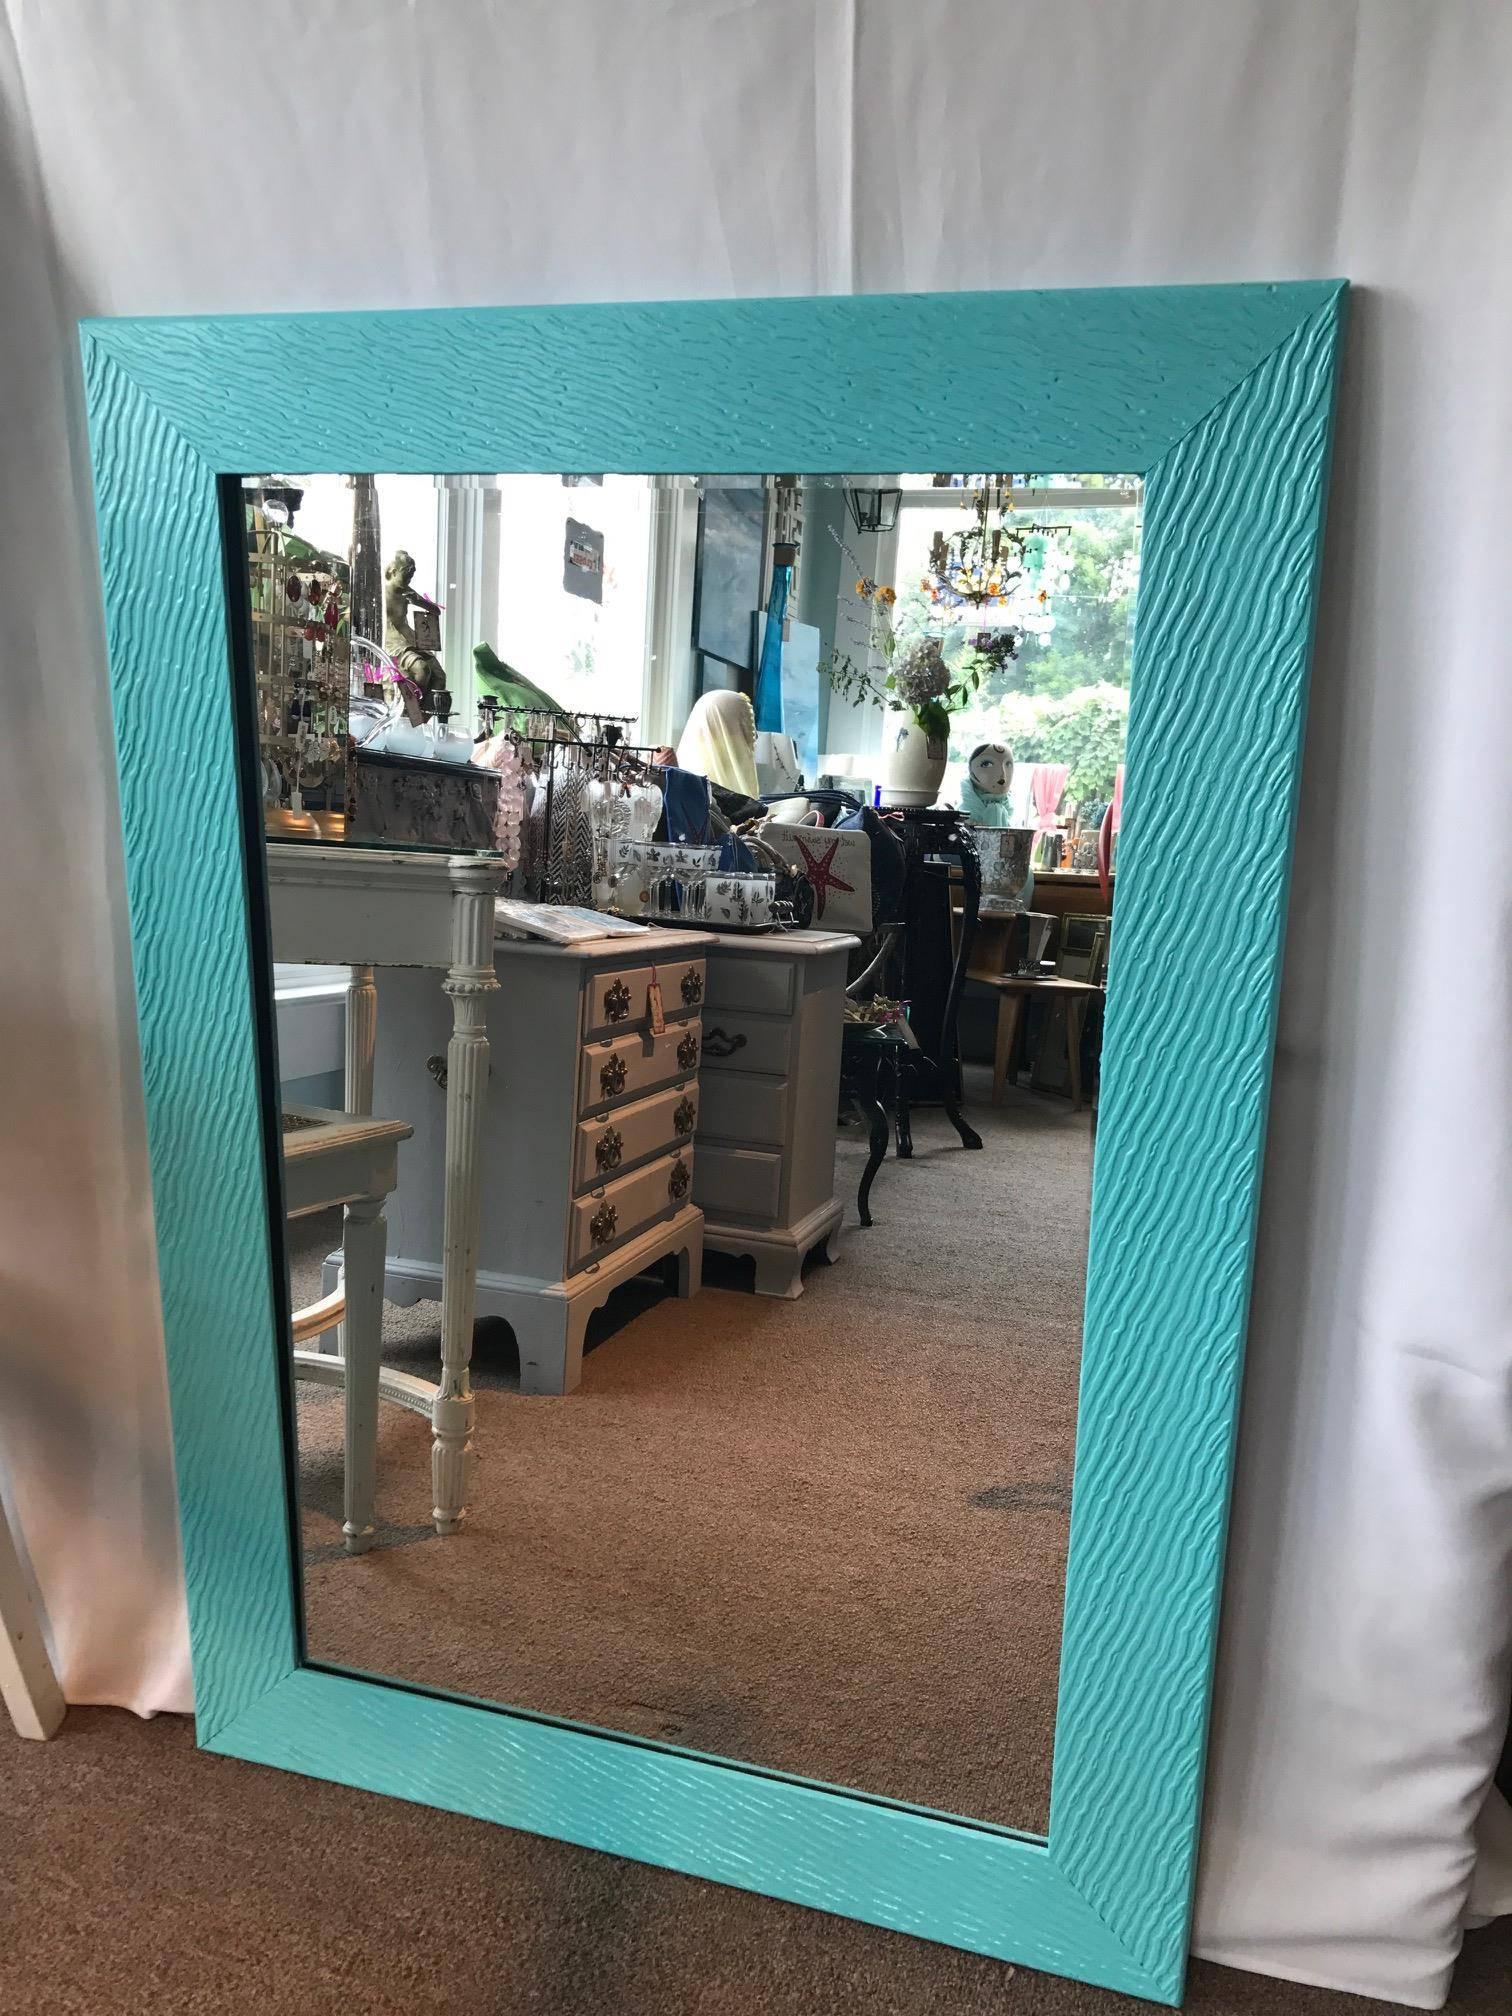 SALE! SALE! SALE! Beach Blues Hand Painted Modern Mirror Wave Design - Can be Horizontal or Vertical Contemporary mirror, add a pop of color. Wave like ridges detailed in the hand-carved wood. Wonderful piece.